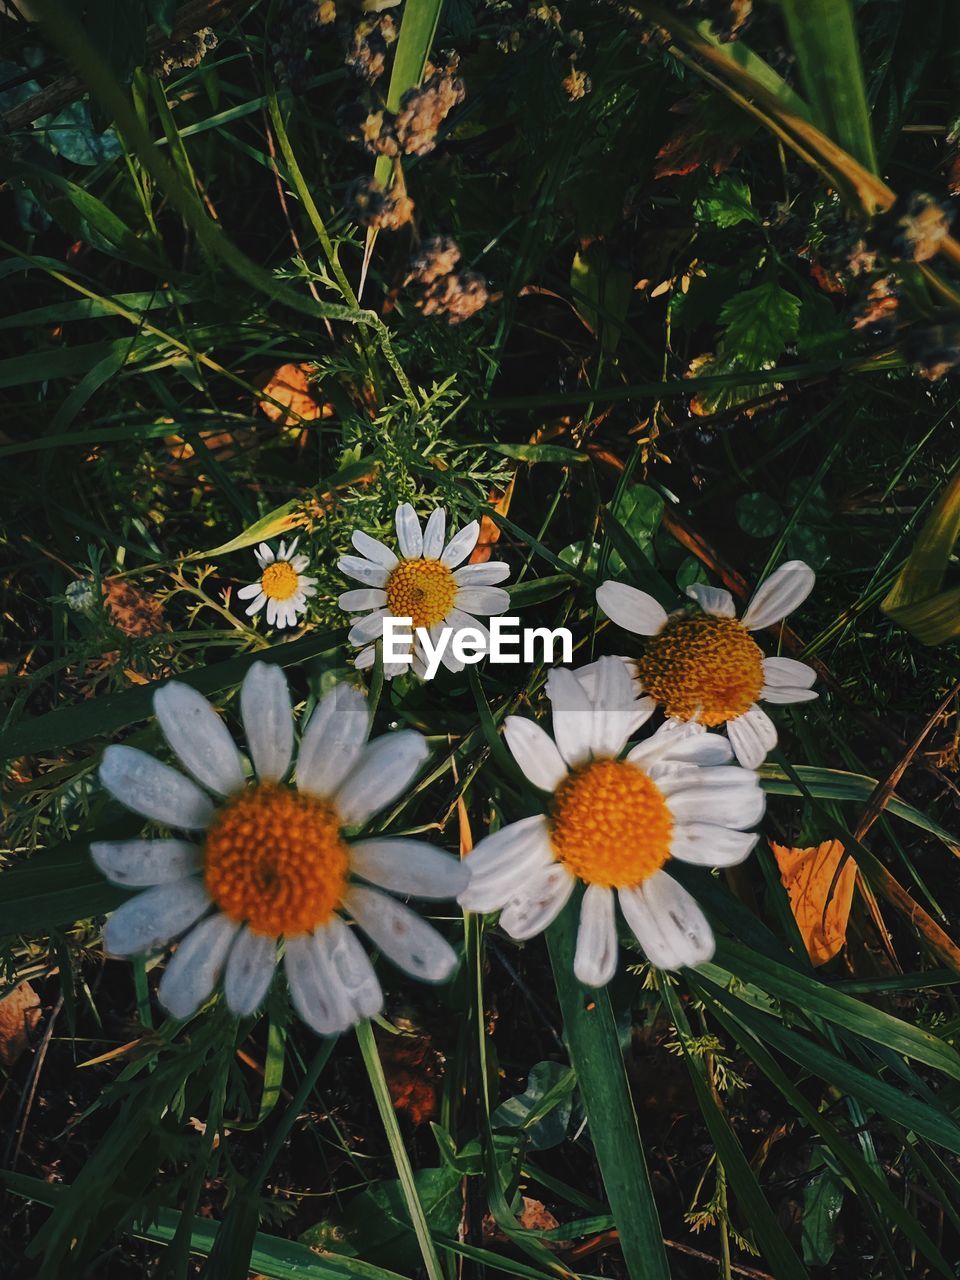 plant, flower, flowering plant, beauty in nature, freshness, growth, nature, fragility, flower head, close-up, daisy, petal, wildflower, inflorescence, high angle view, no people, yellow, pollen, meadow, day, outdoors, grass, green, field, land, white, botany, plant part, leaf